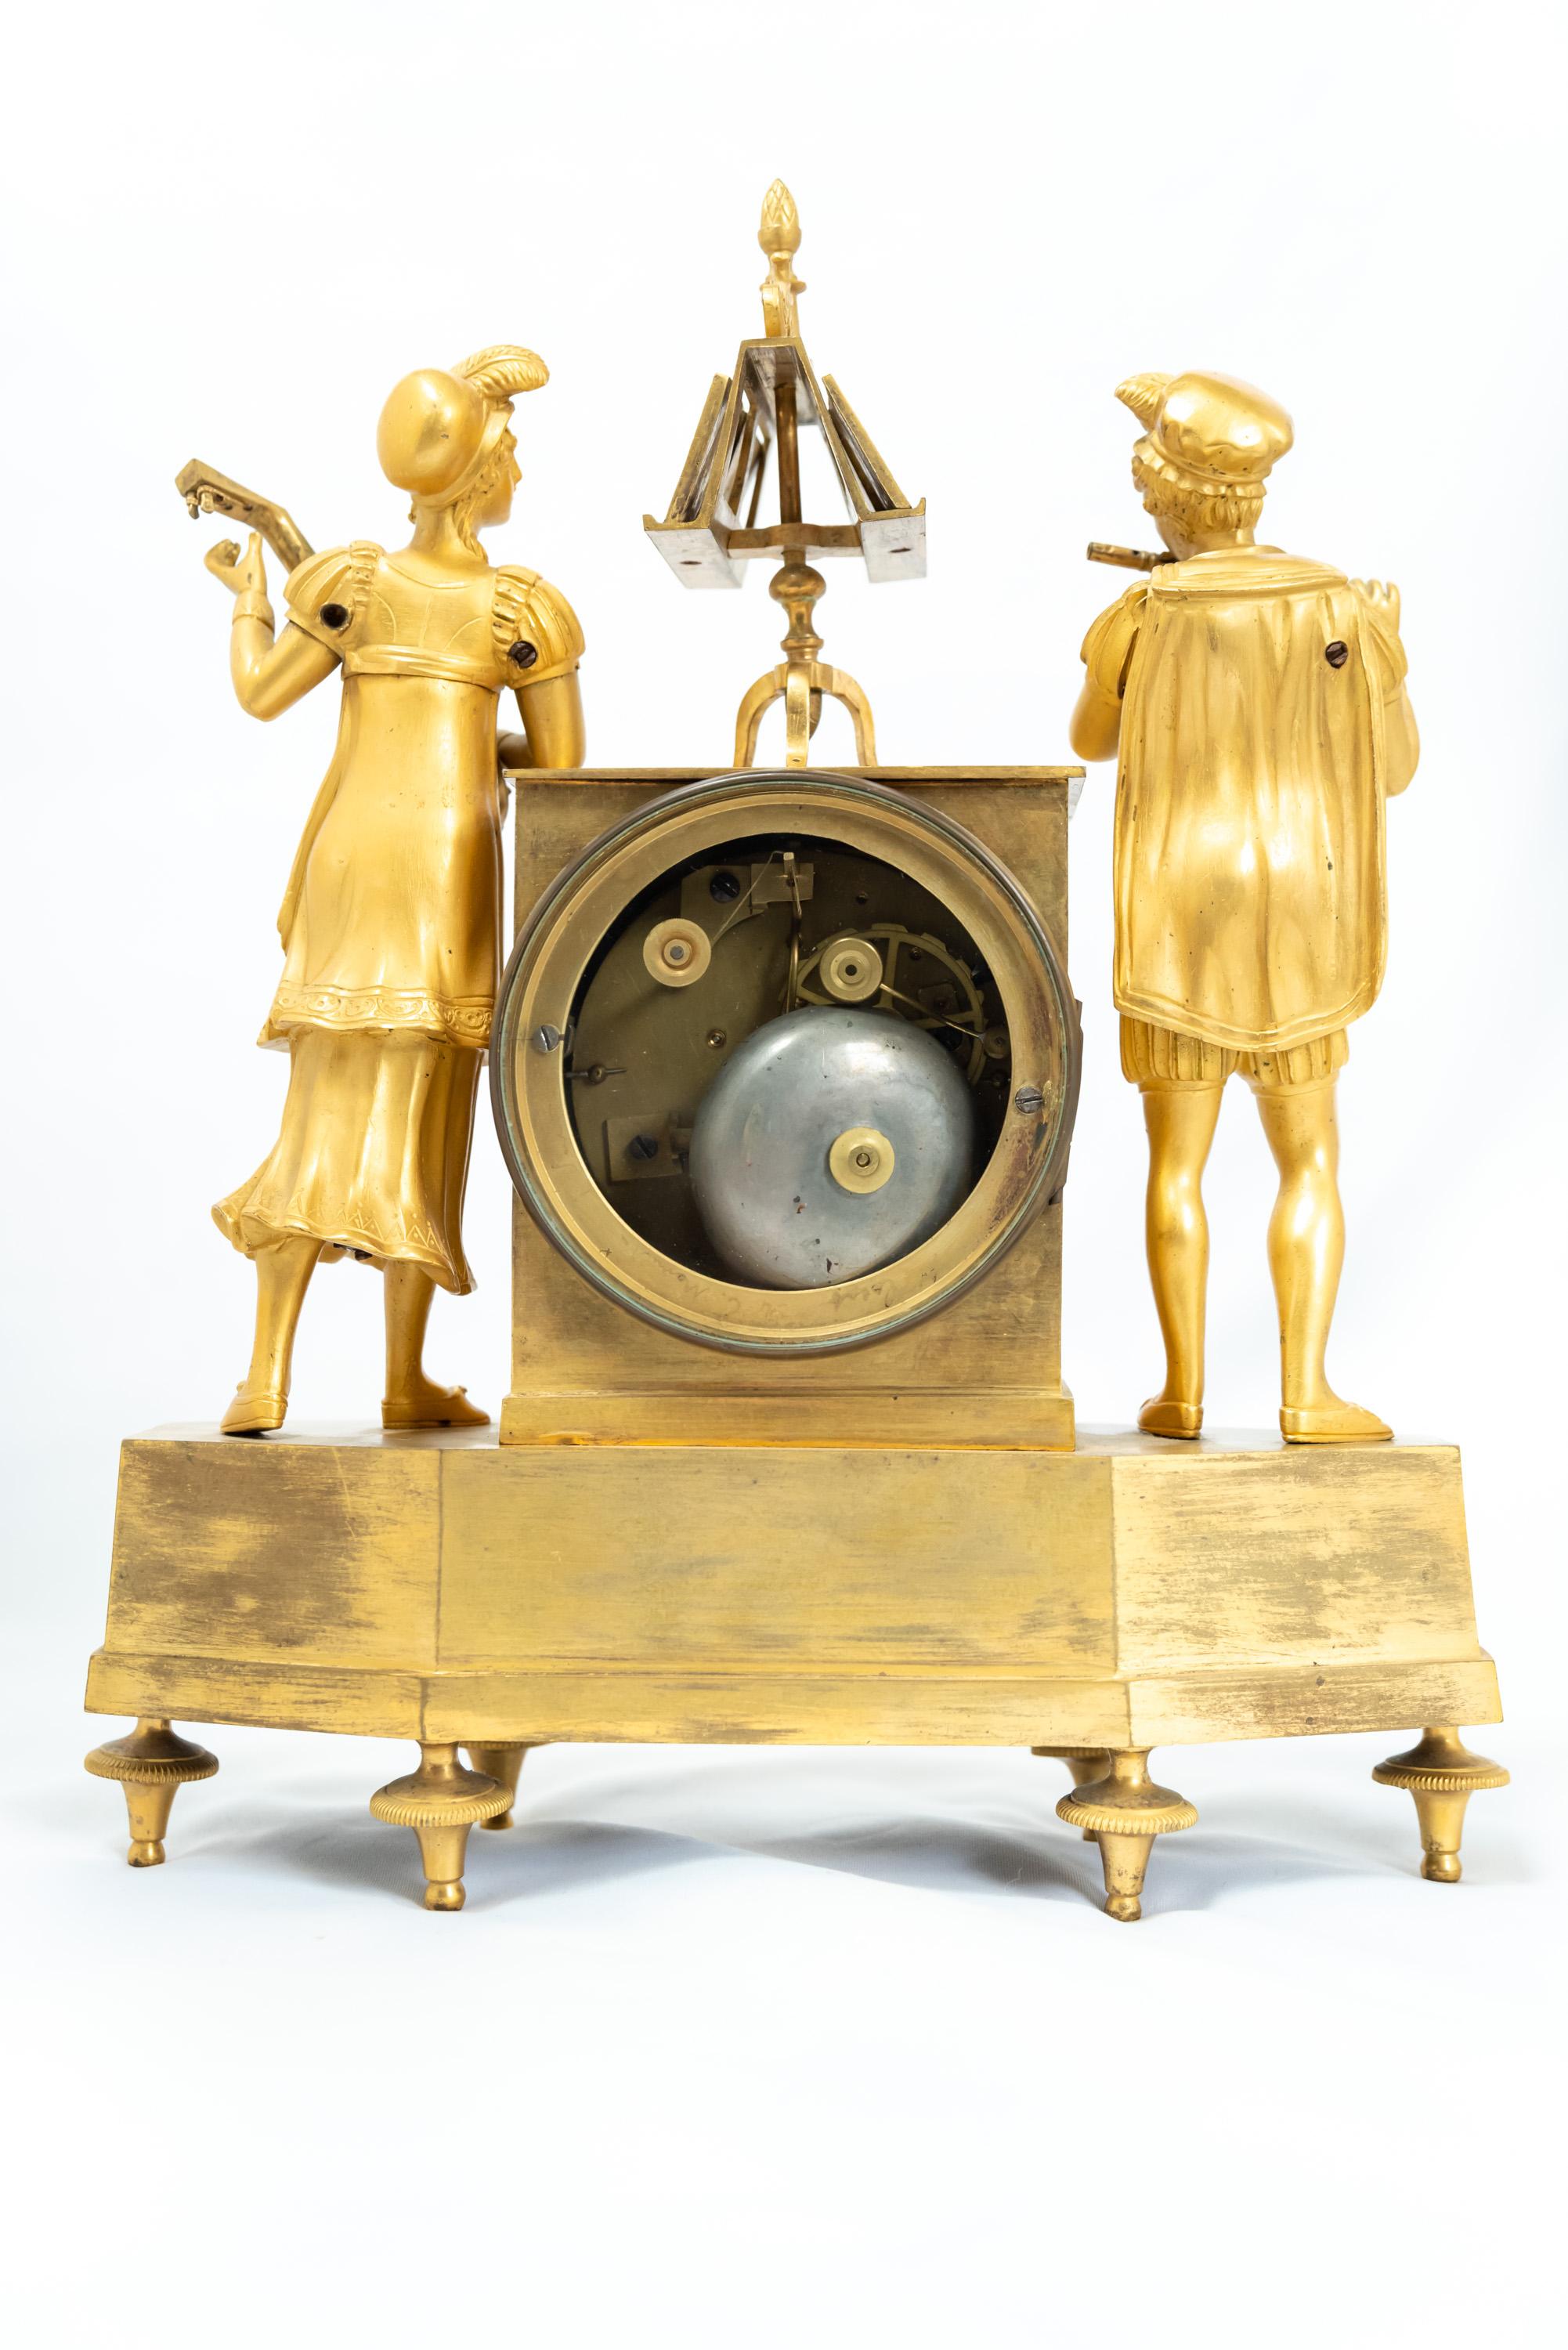 French Fire-Gilt Bronze Clock Depicting Troubadour Figures c. 1820 In Good Condition For Sale In 263-0031, JP